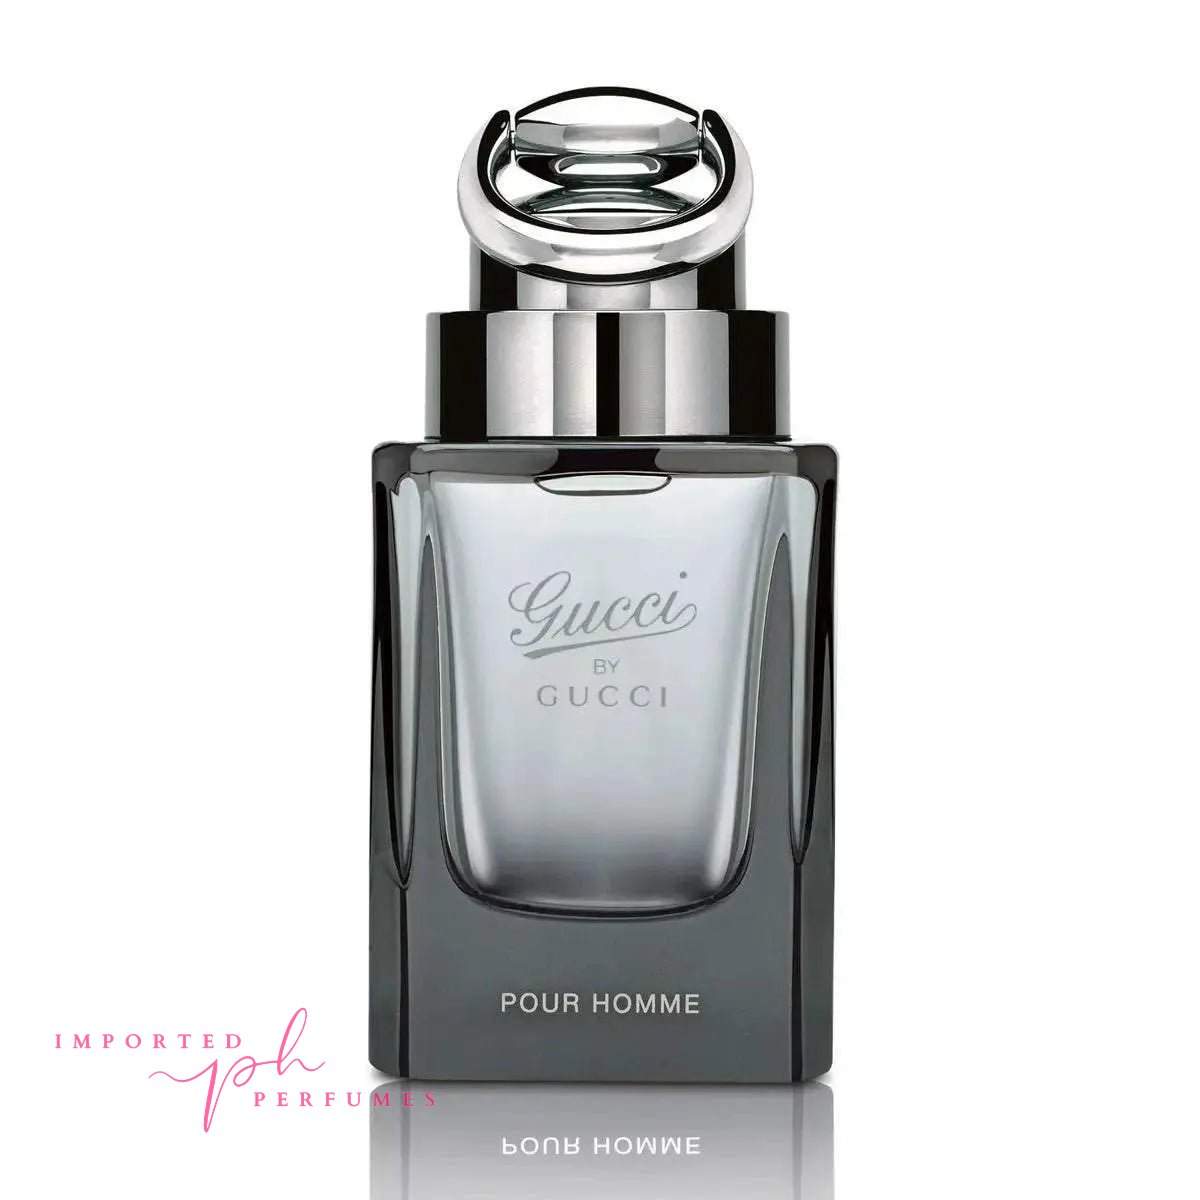 [TESTER] Gucci By Gucci by Gucci for Men Eau De Toilette Spray 90ml-Imported Perfumes Co-Gucci,Gucci by Gucci,men,Pour Homme,test,TESTER